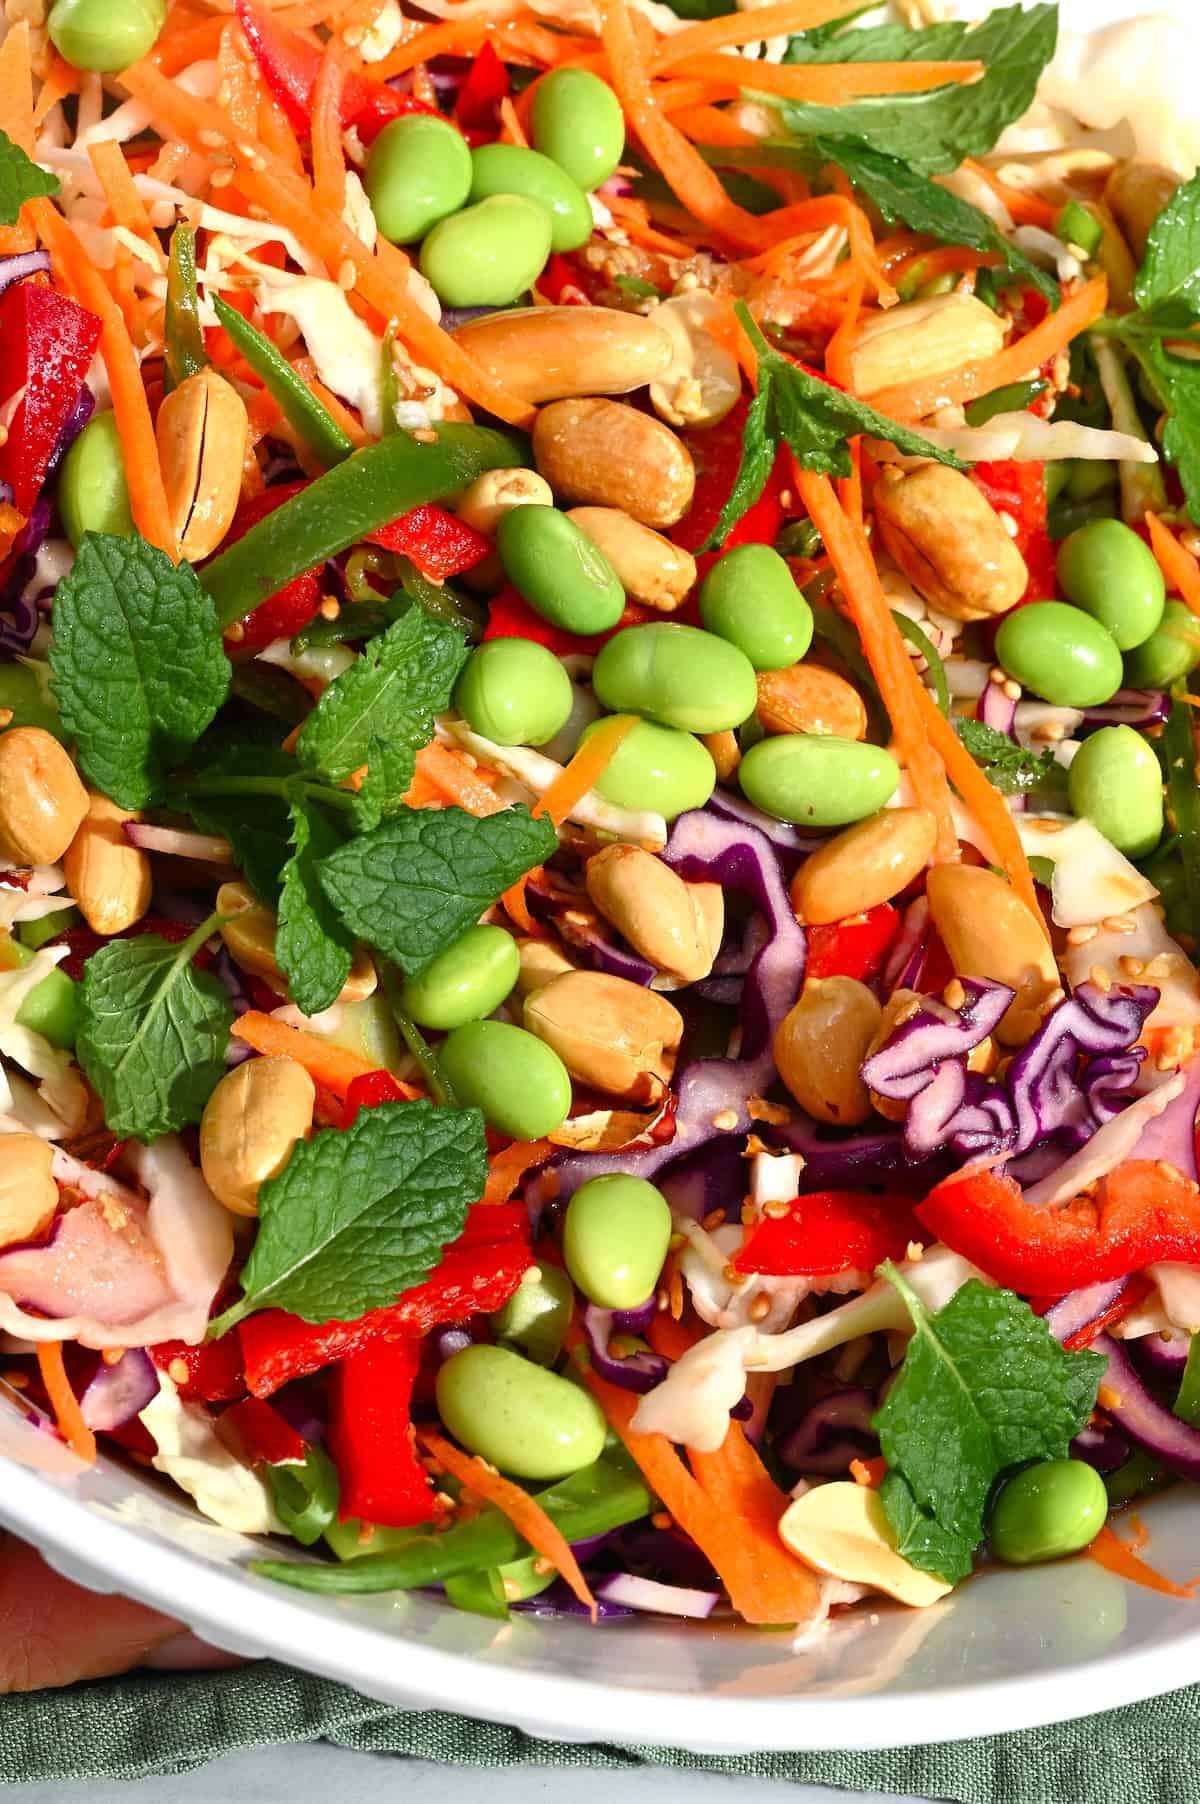 A serving of Asian salad with edemame and mint